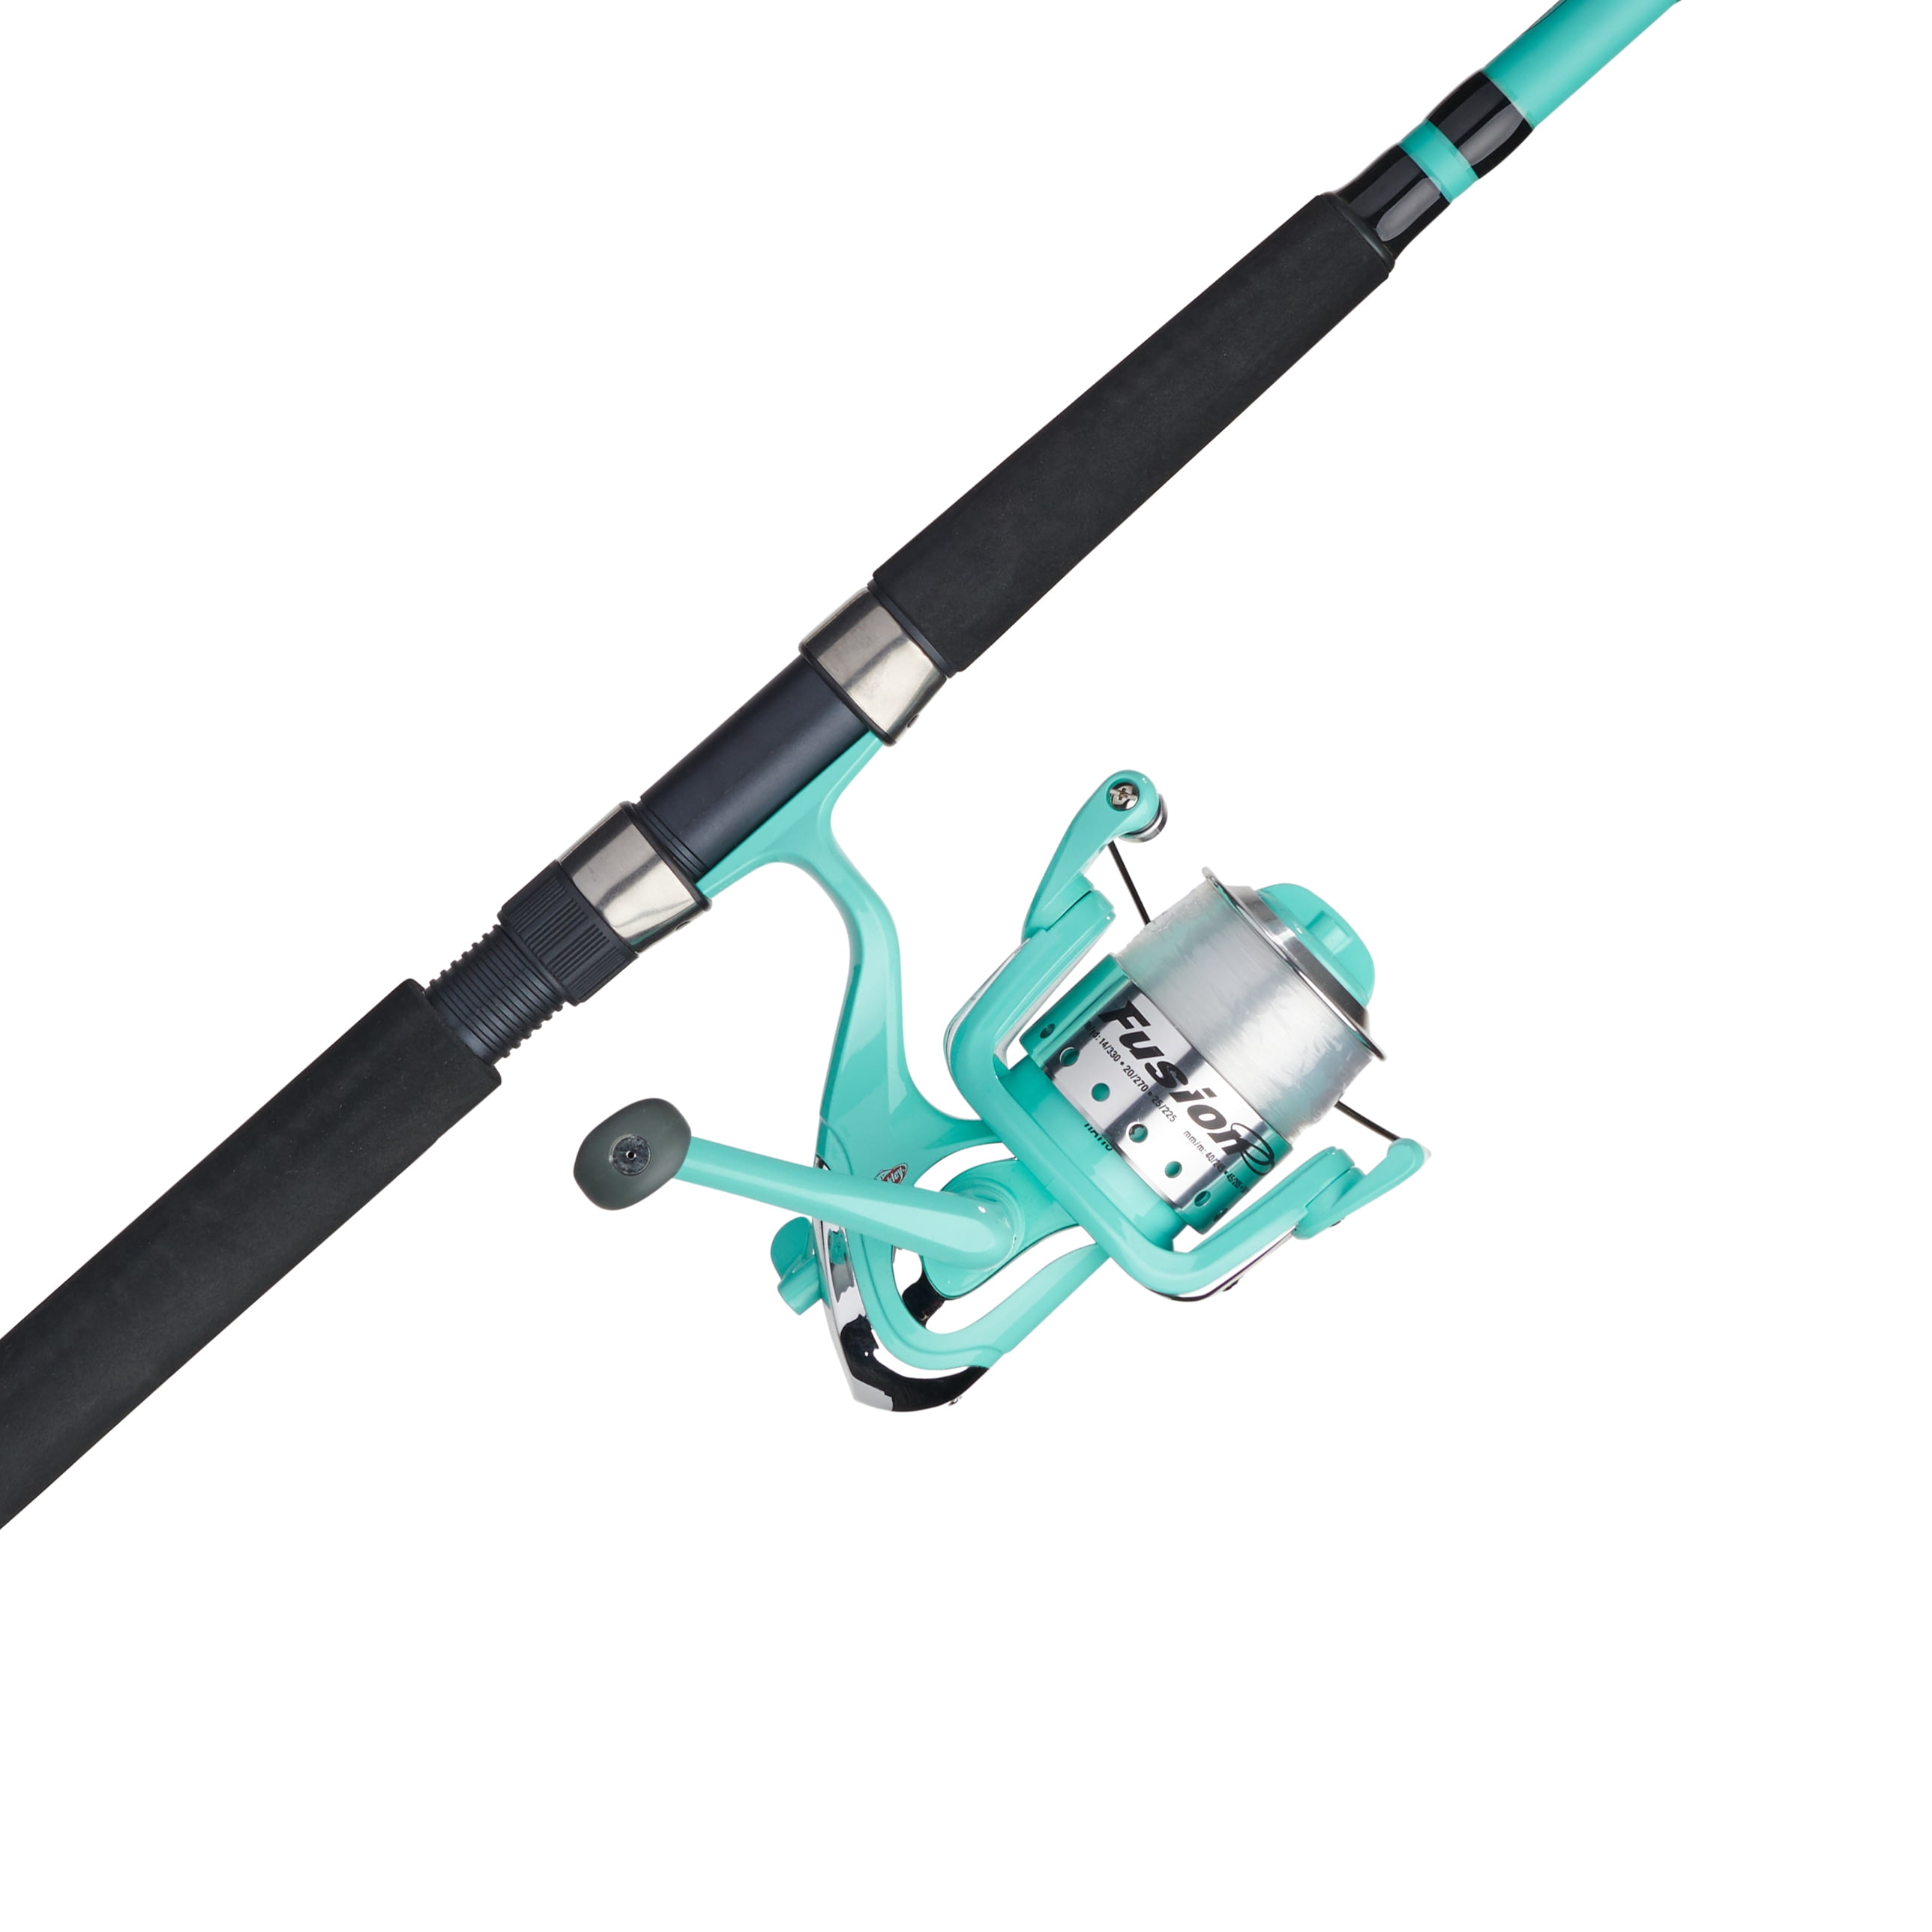 VGEBY Fishing Rod and Spinning Reel Combo, Stainless Steel